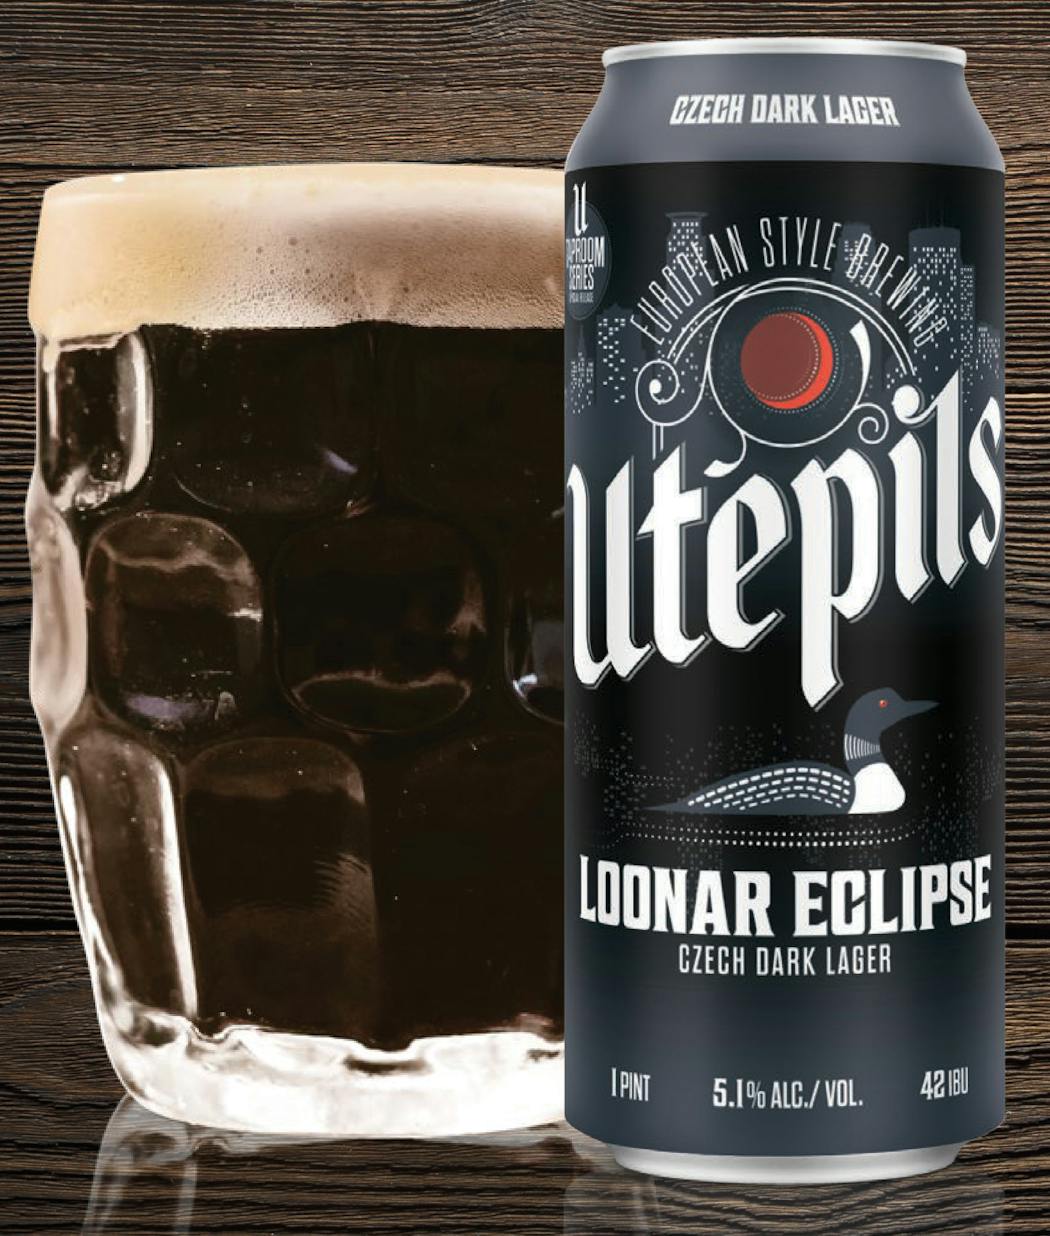 The nearly black color of Loonar Eclipse from Utepils Brewing in Minneapolis belies its overall lightness.